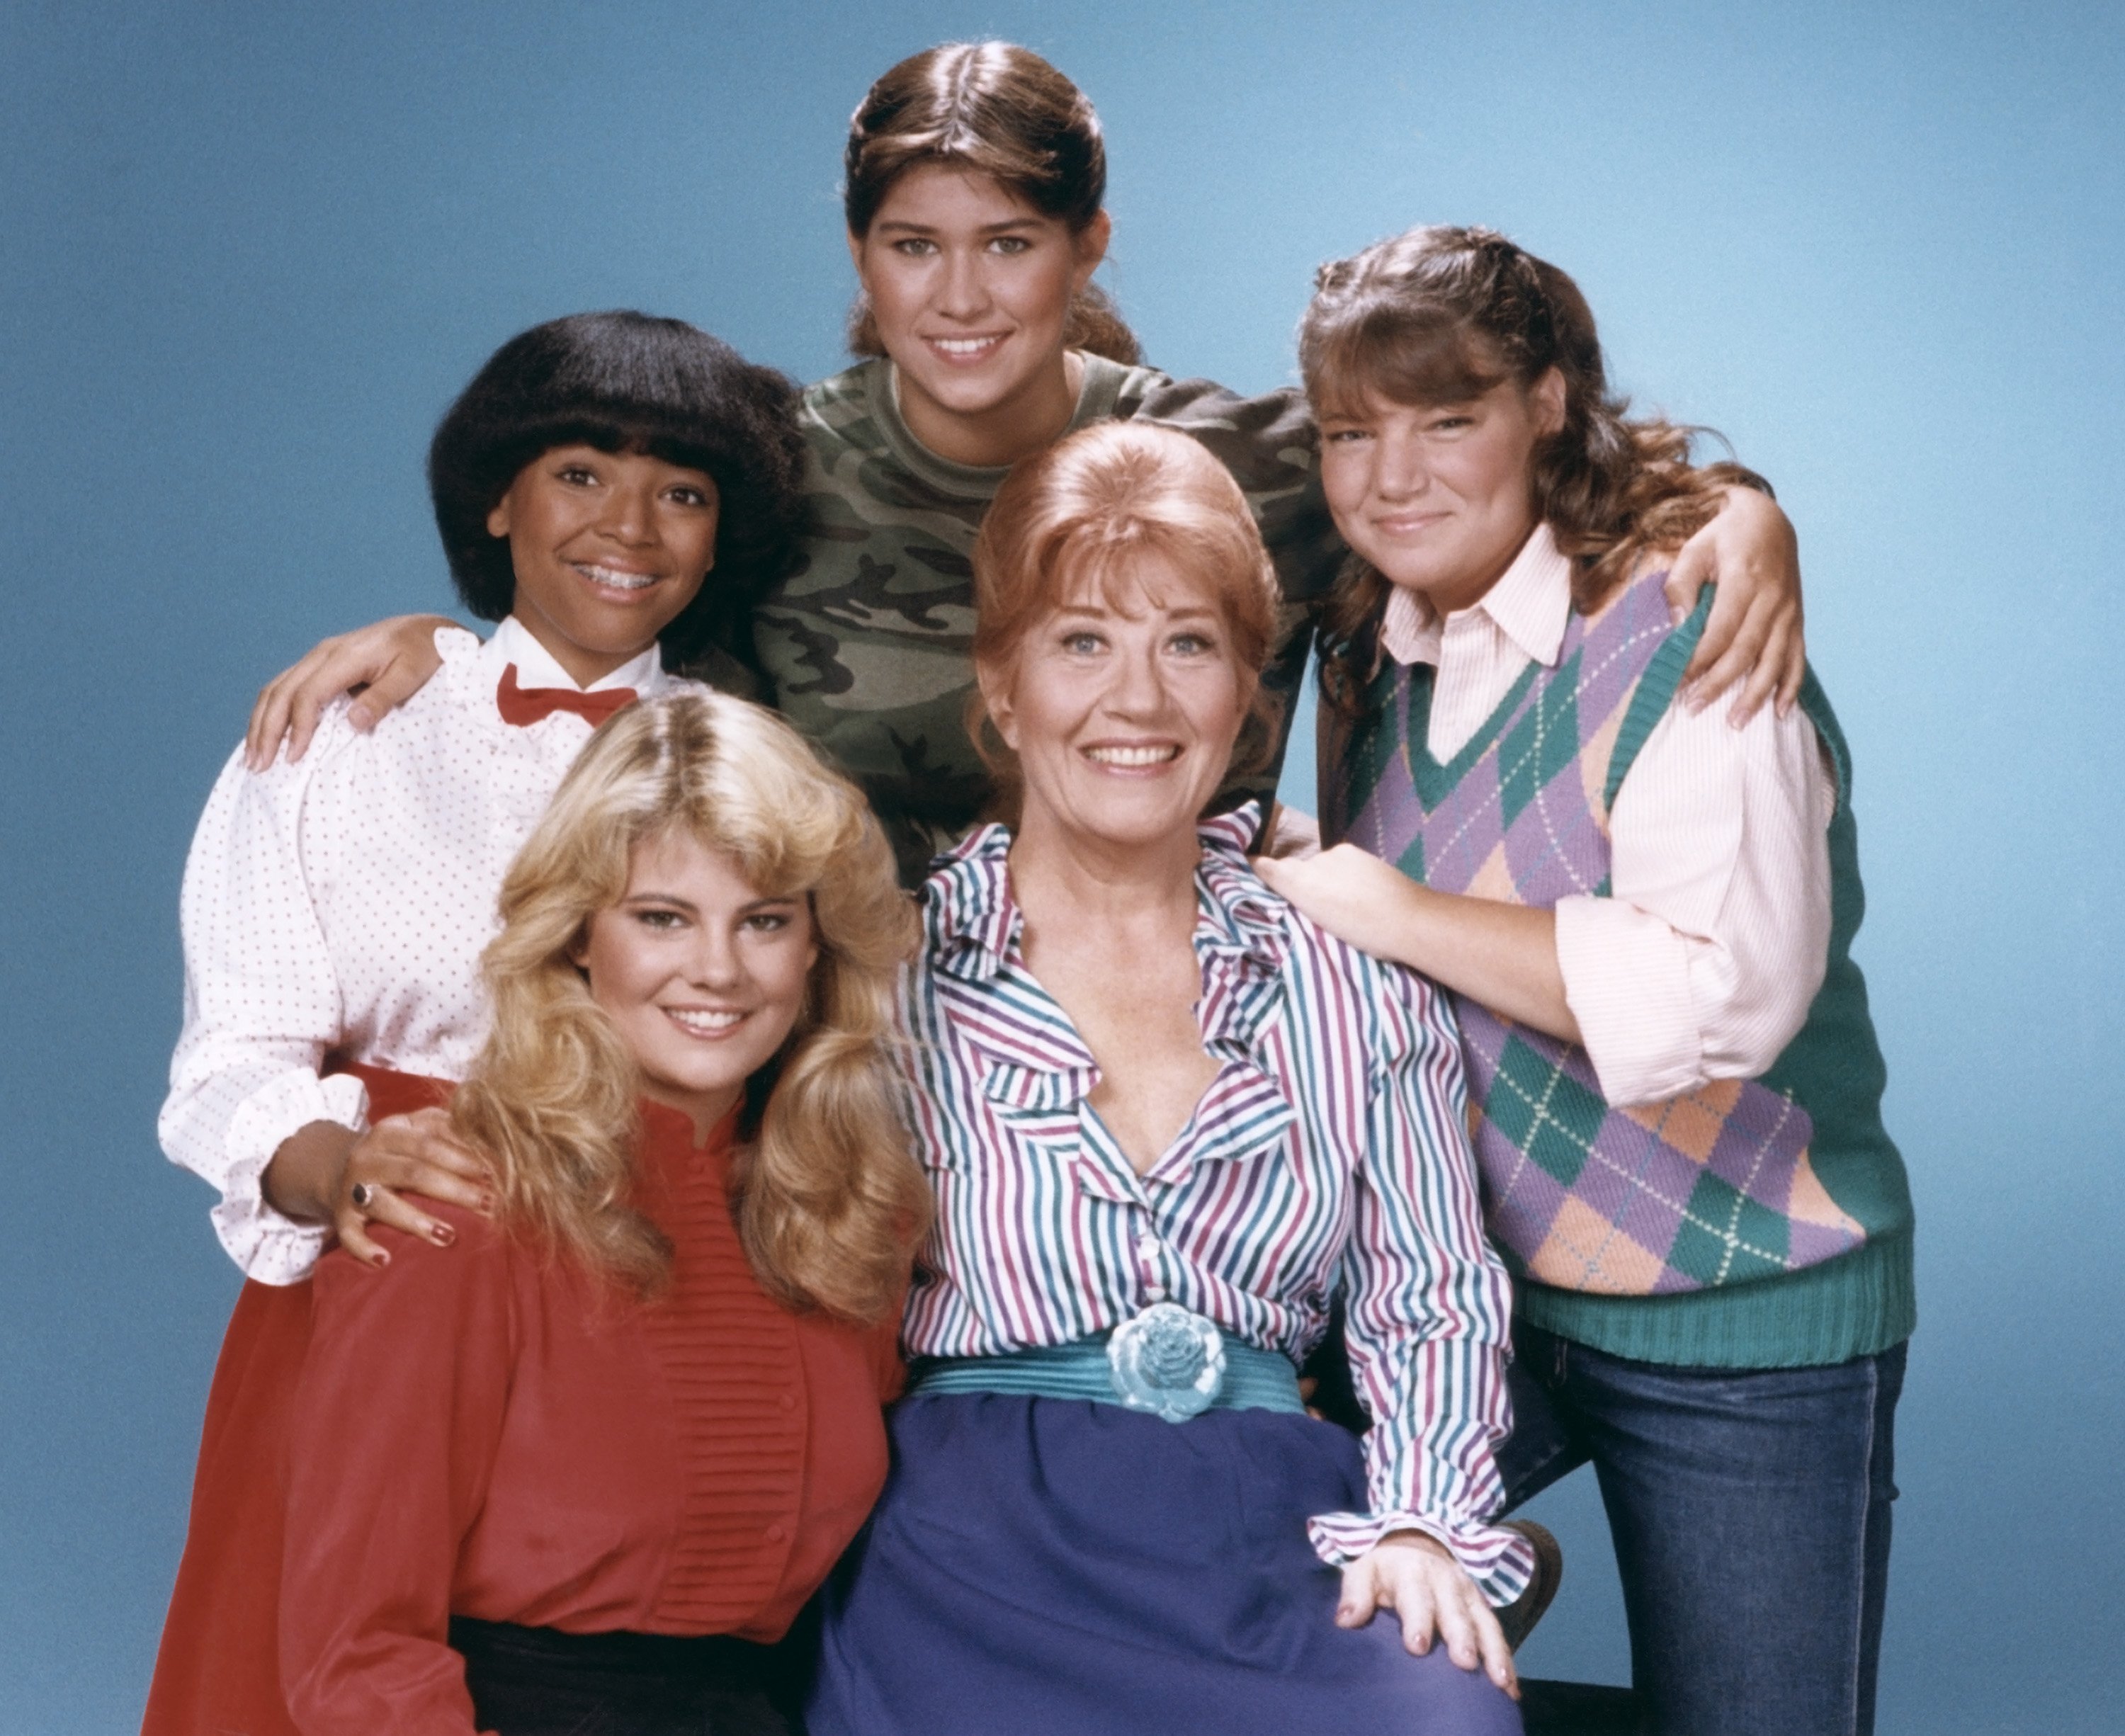 Nancy McKeon, Mindy Cohn, Charlotte Rae, Lisa Whelchel, and Kim Fields on the set of "The Facts of Life" | Source: Getty Images